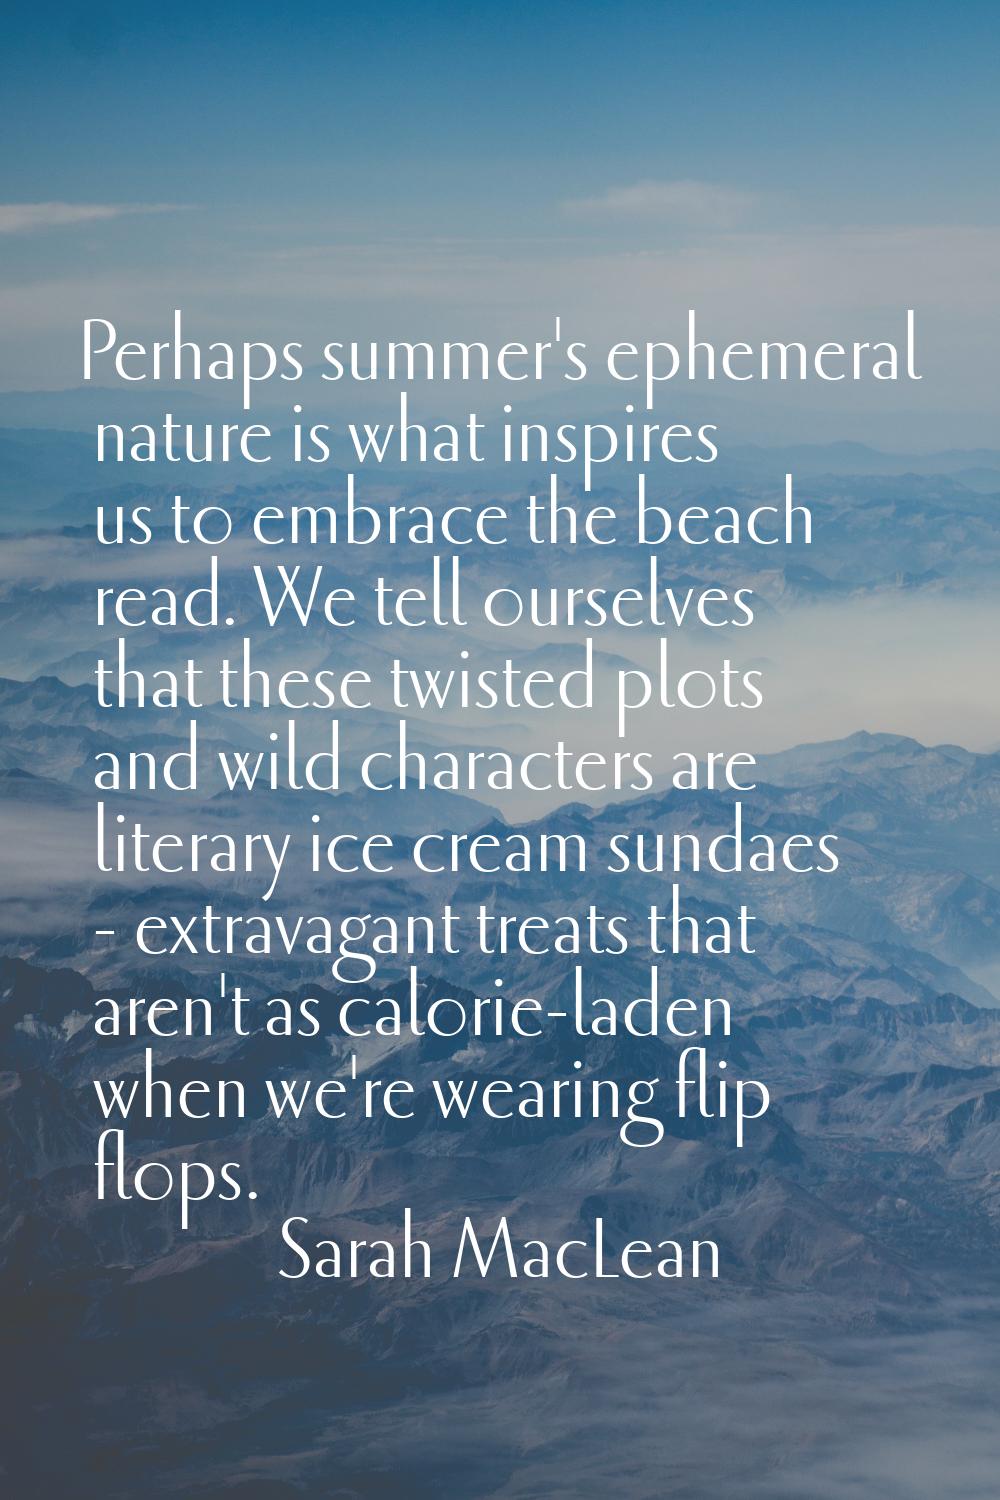 Perhaps summer's ephemeral nature is what inspires us to embrace the beach read. We tell ourselves 